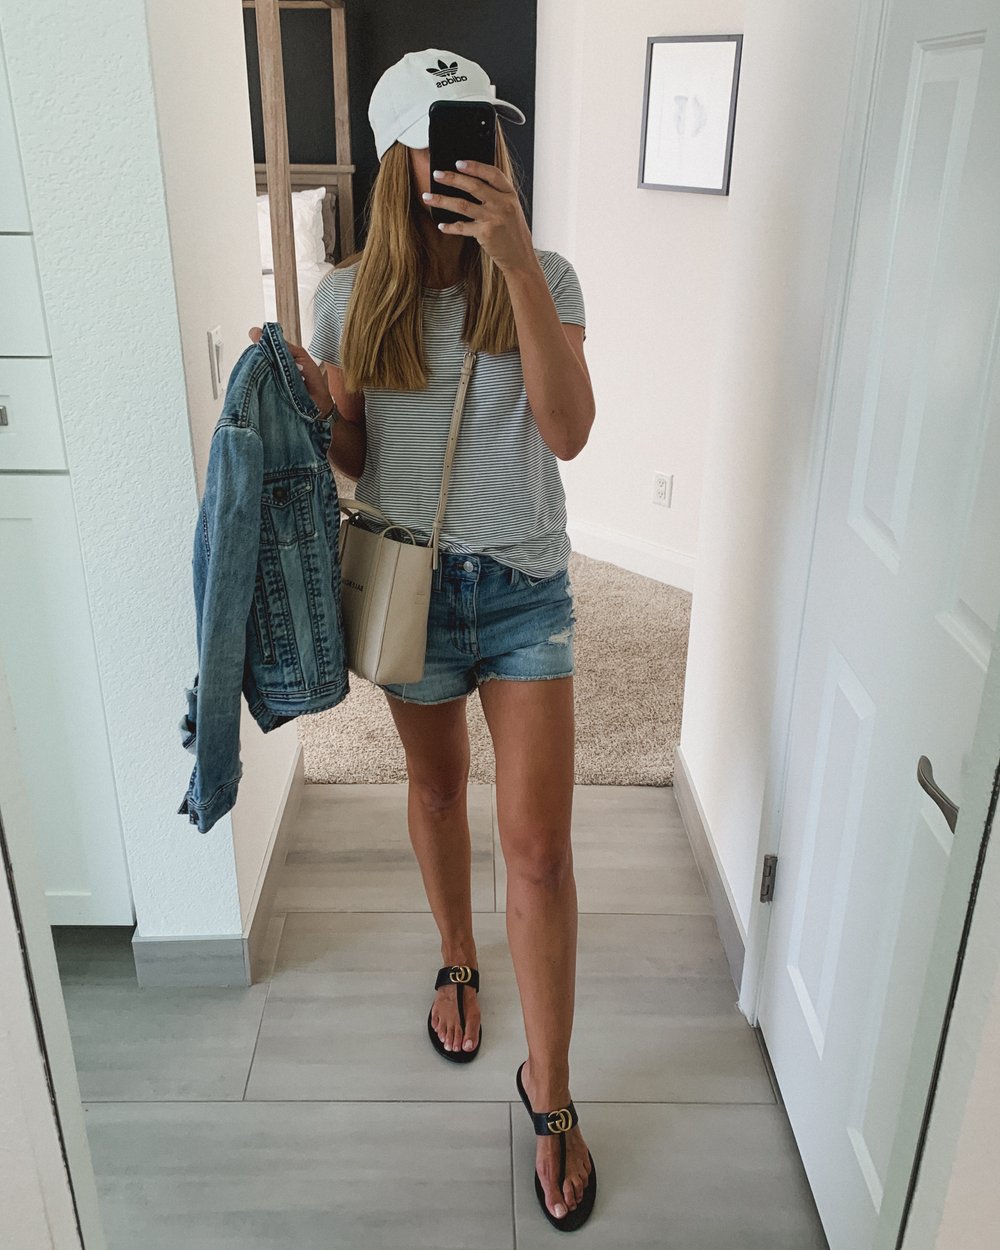  Jessica Ashley (hellojessicahley) styling Gucci Sandal Outfit with denim Madewell shorts, striped H&amp;M t-shirt and balenciaga cross body | outfit inspiration, Gucci Marmont Sandal Outfit 